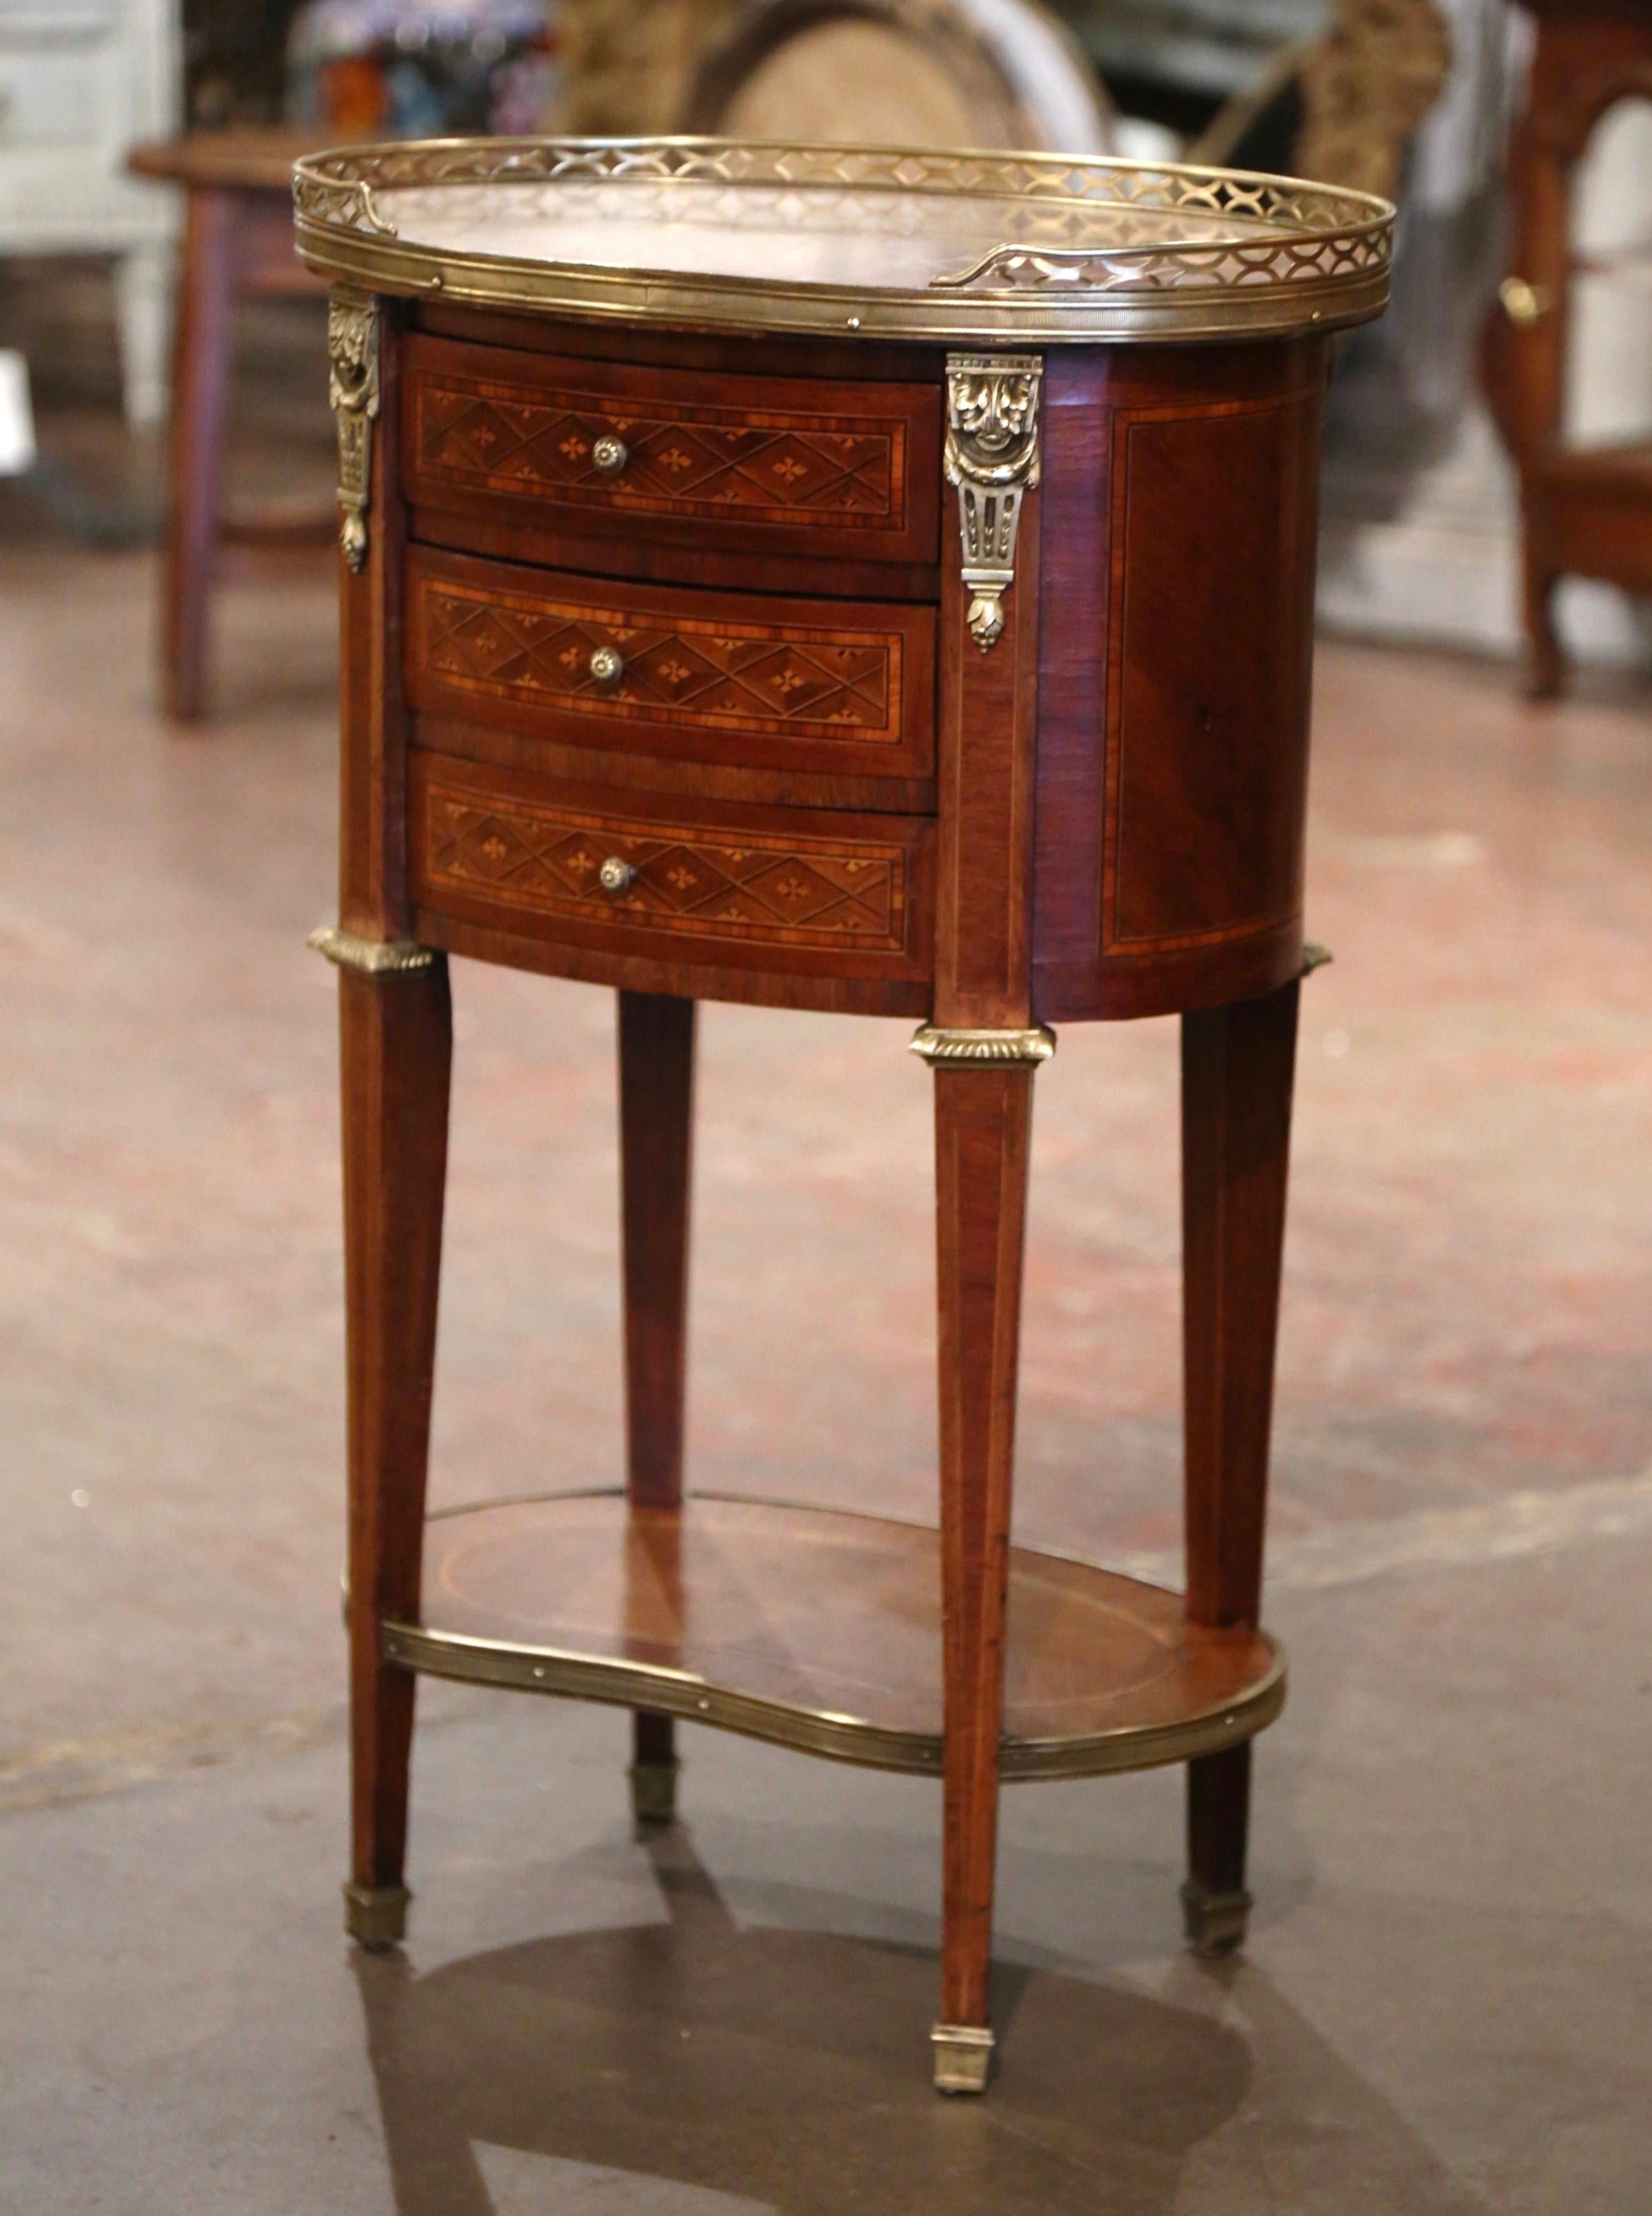 Crafted in France circa 1950 and built of walnut, the oval table sits on four tapered legs decorated with brass mounts at the shoulders, ending with bronze caps over feet. The chest features detailed marquetry work around the apron, and is further